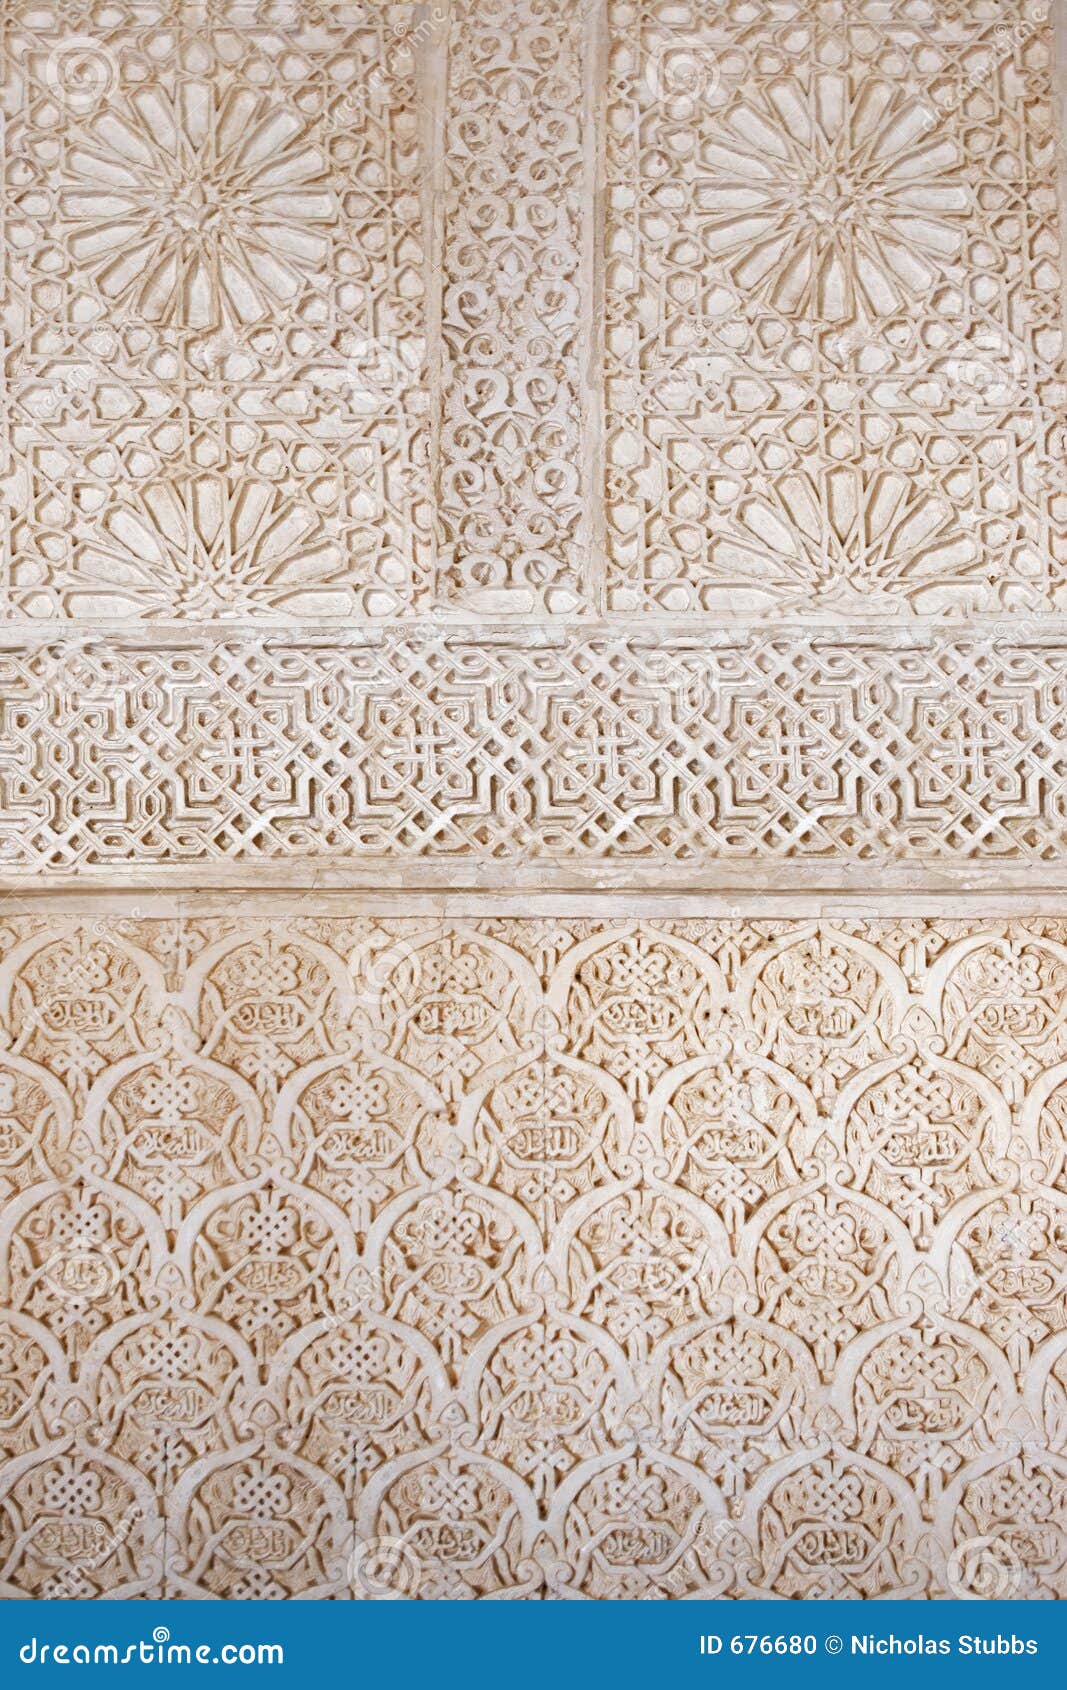 ancient architecture in the alhambra palace in spain